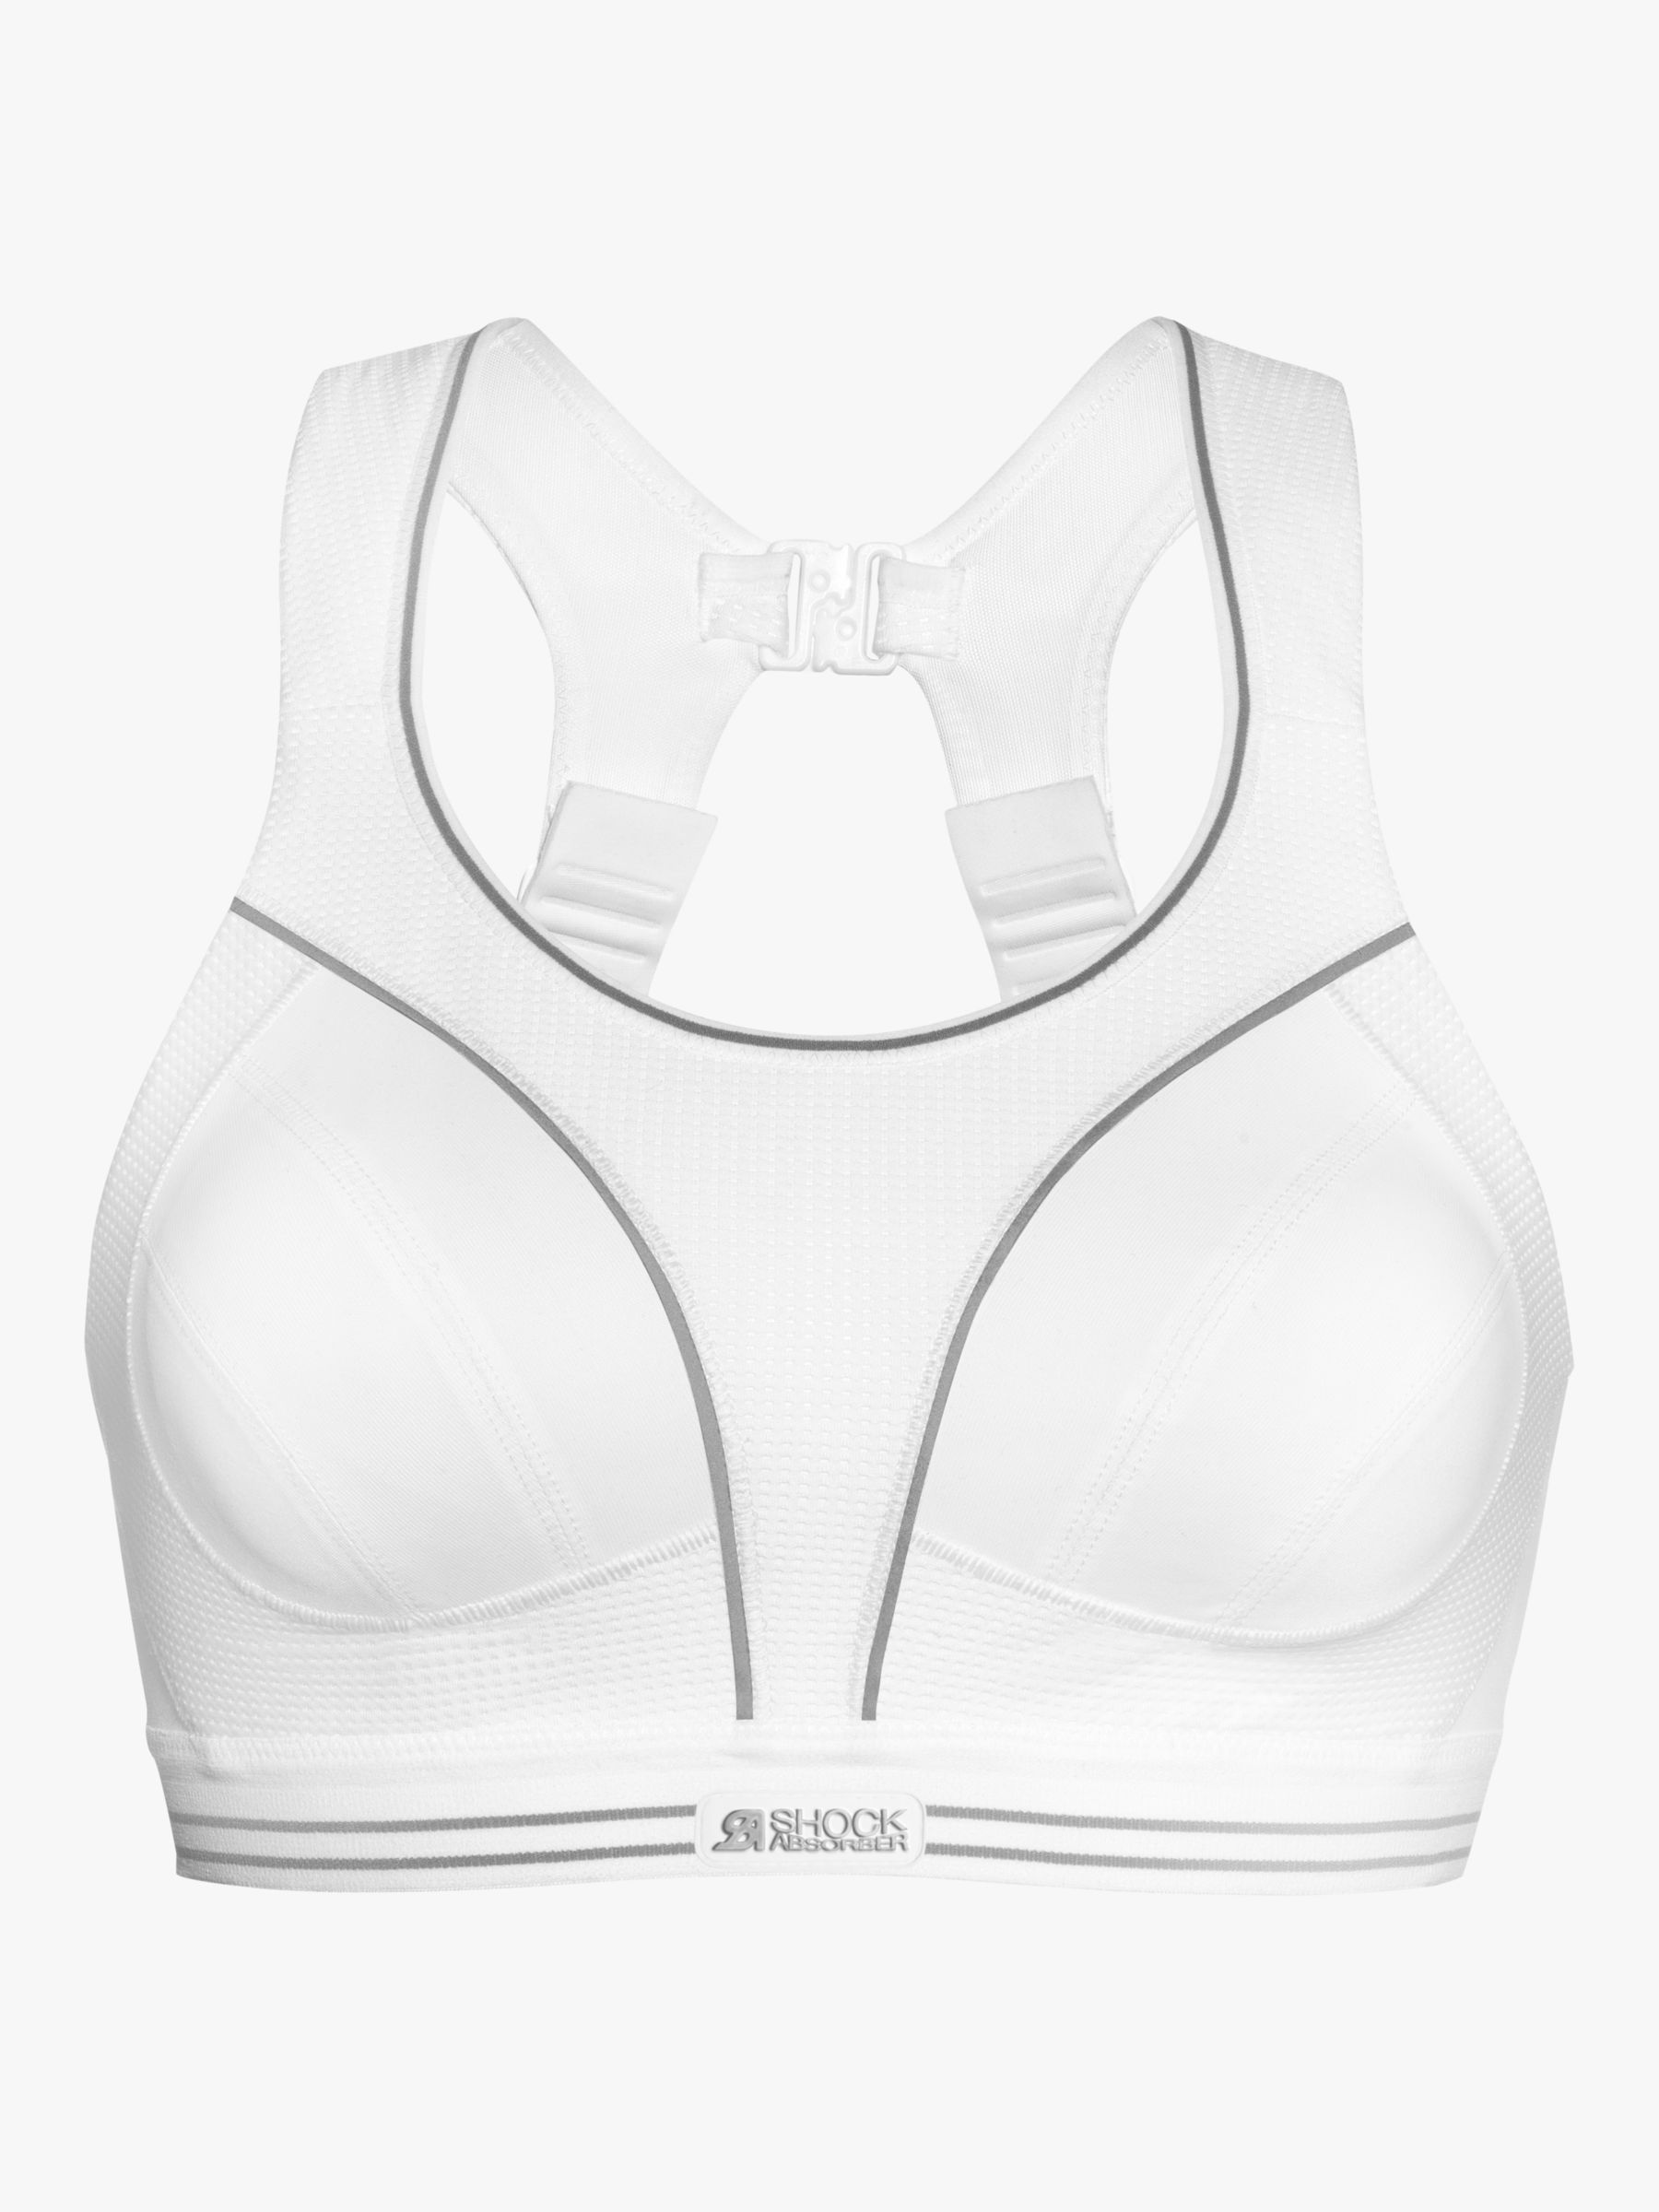 Shock Absorber Ultimate Run Non-Wired Sports Bra, White at John